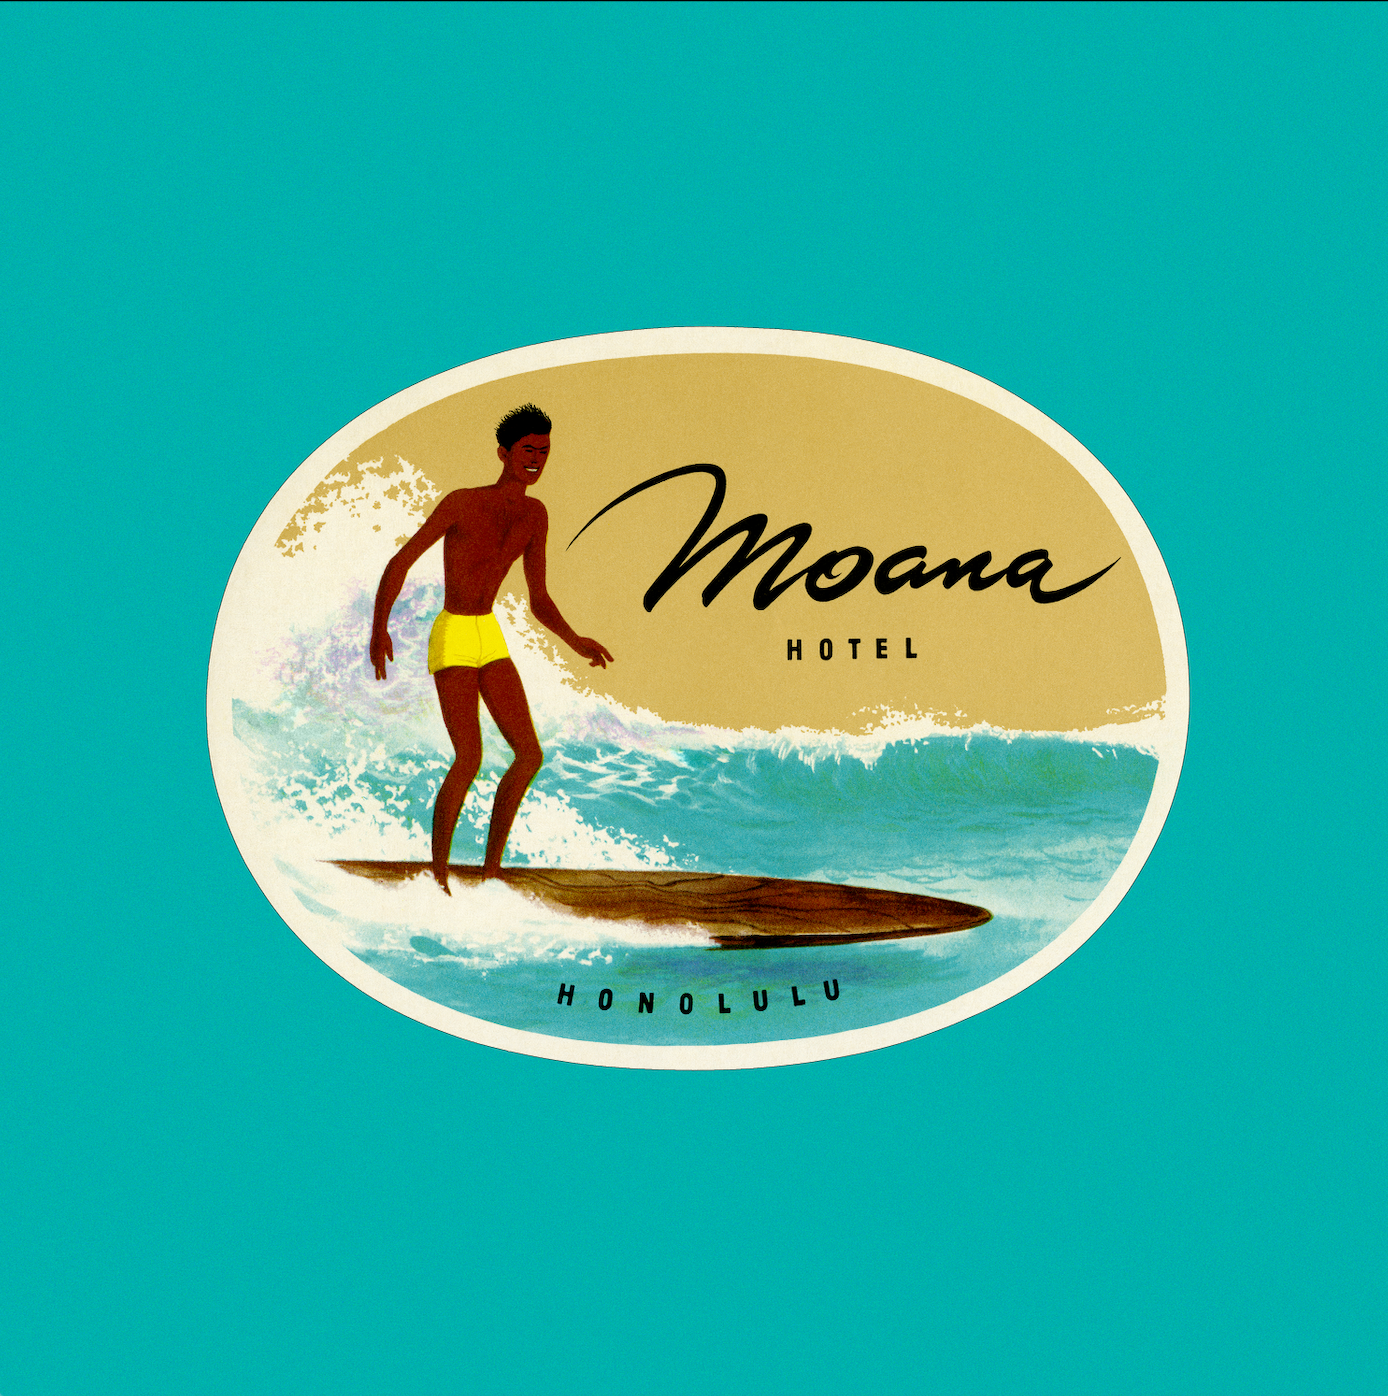 Oval graphic in color with the words Moana Hotel Honolulu and featuring a surfer on the water and a wave behind him set against a turquoise square background.